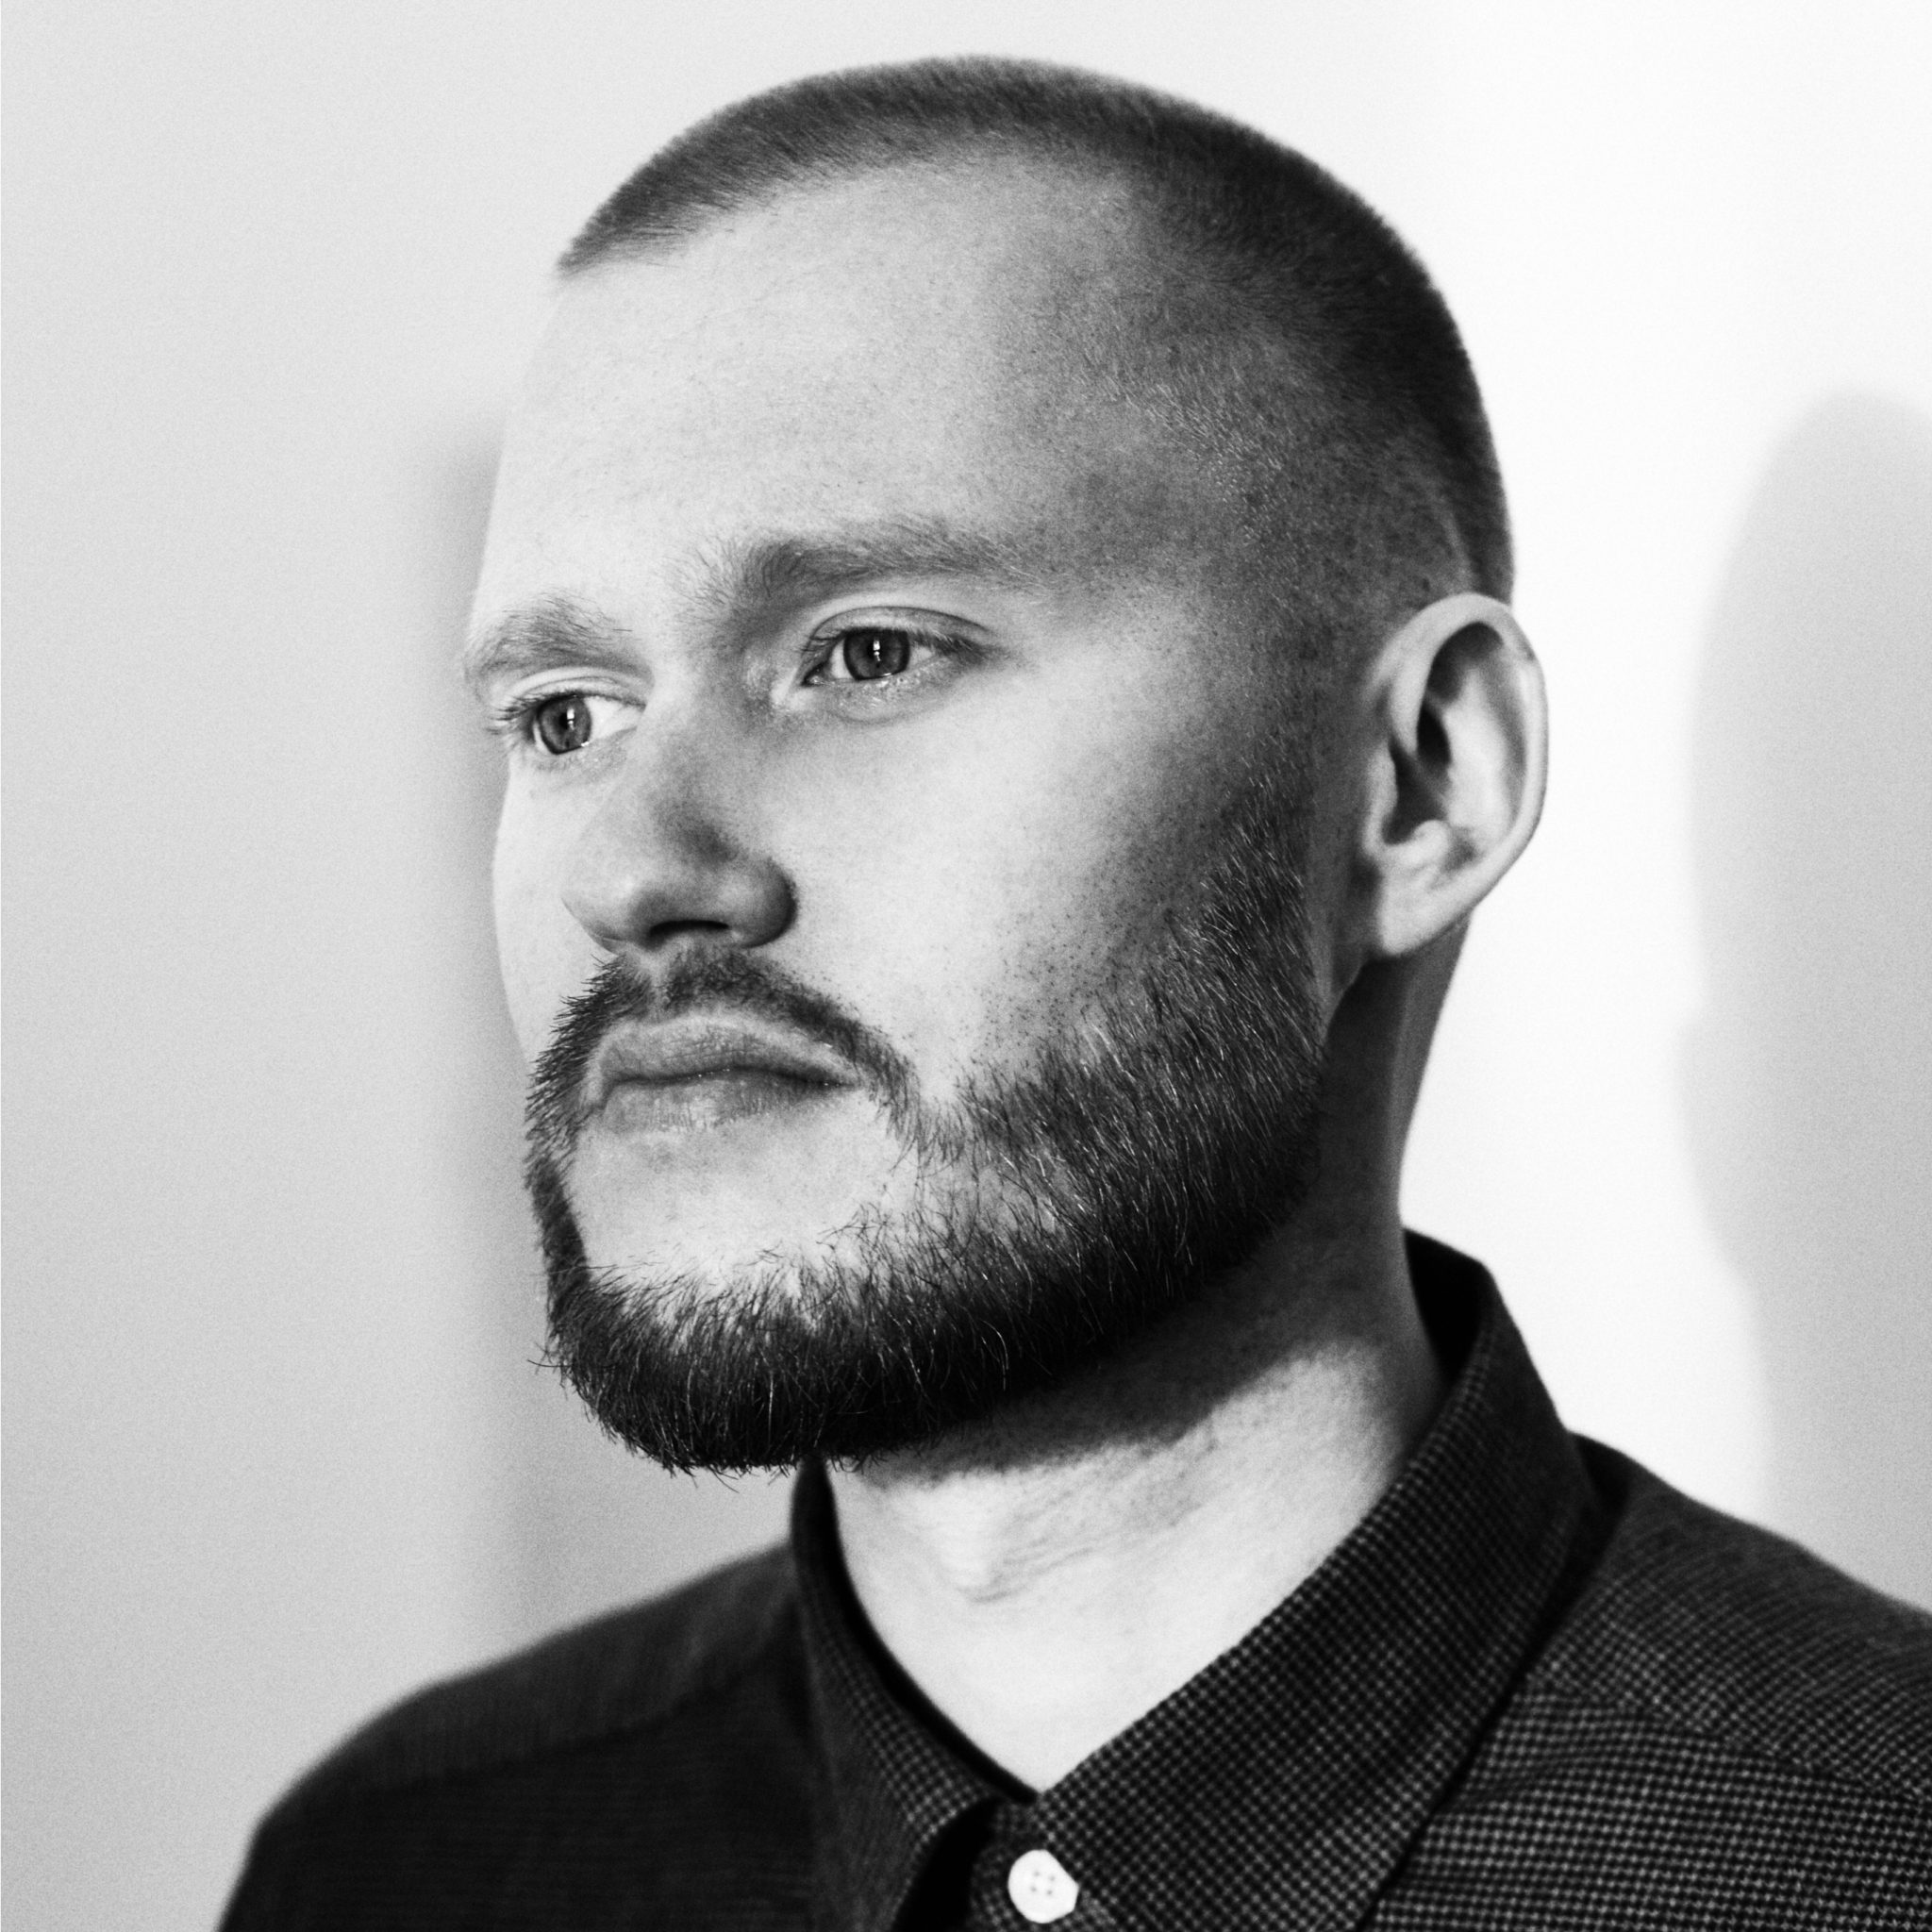 In Conversation with Swedish DJ/Producer act, CAZZETTE, after release of ‘Stereo Mono’ EP